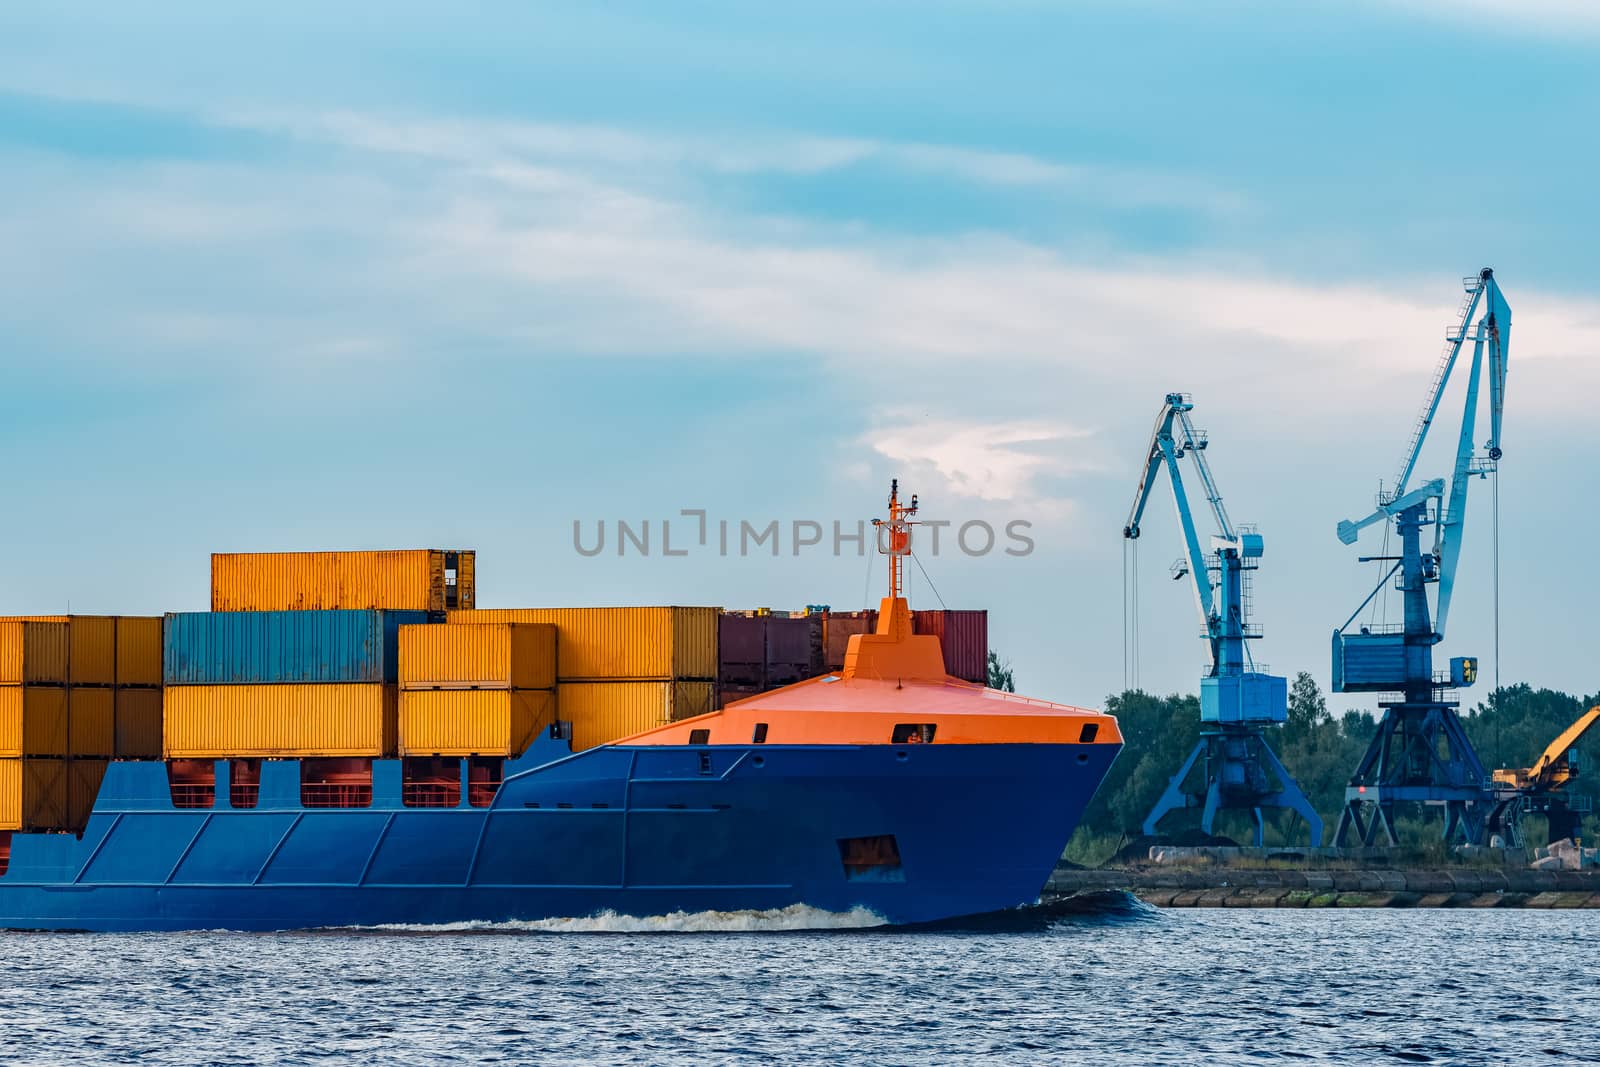 Blue container ship. Global logistics and merchandise transfer